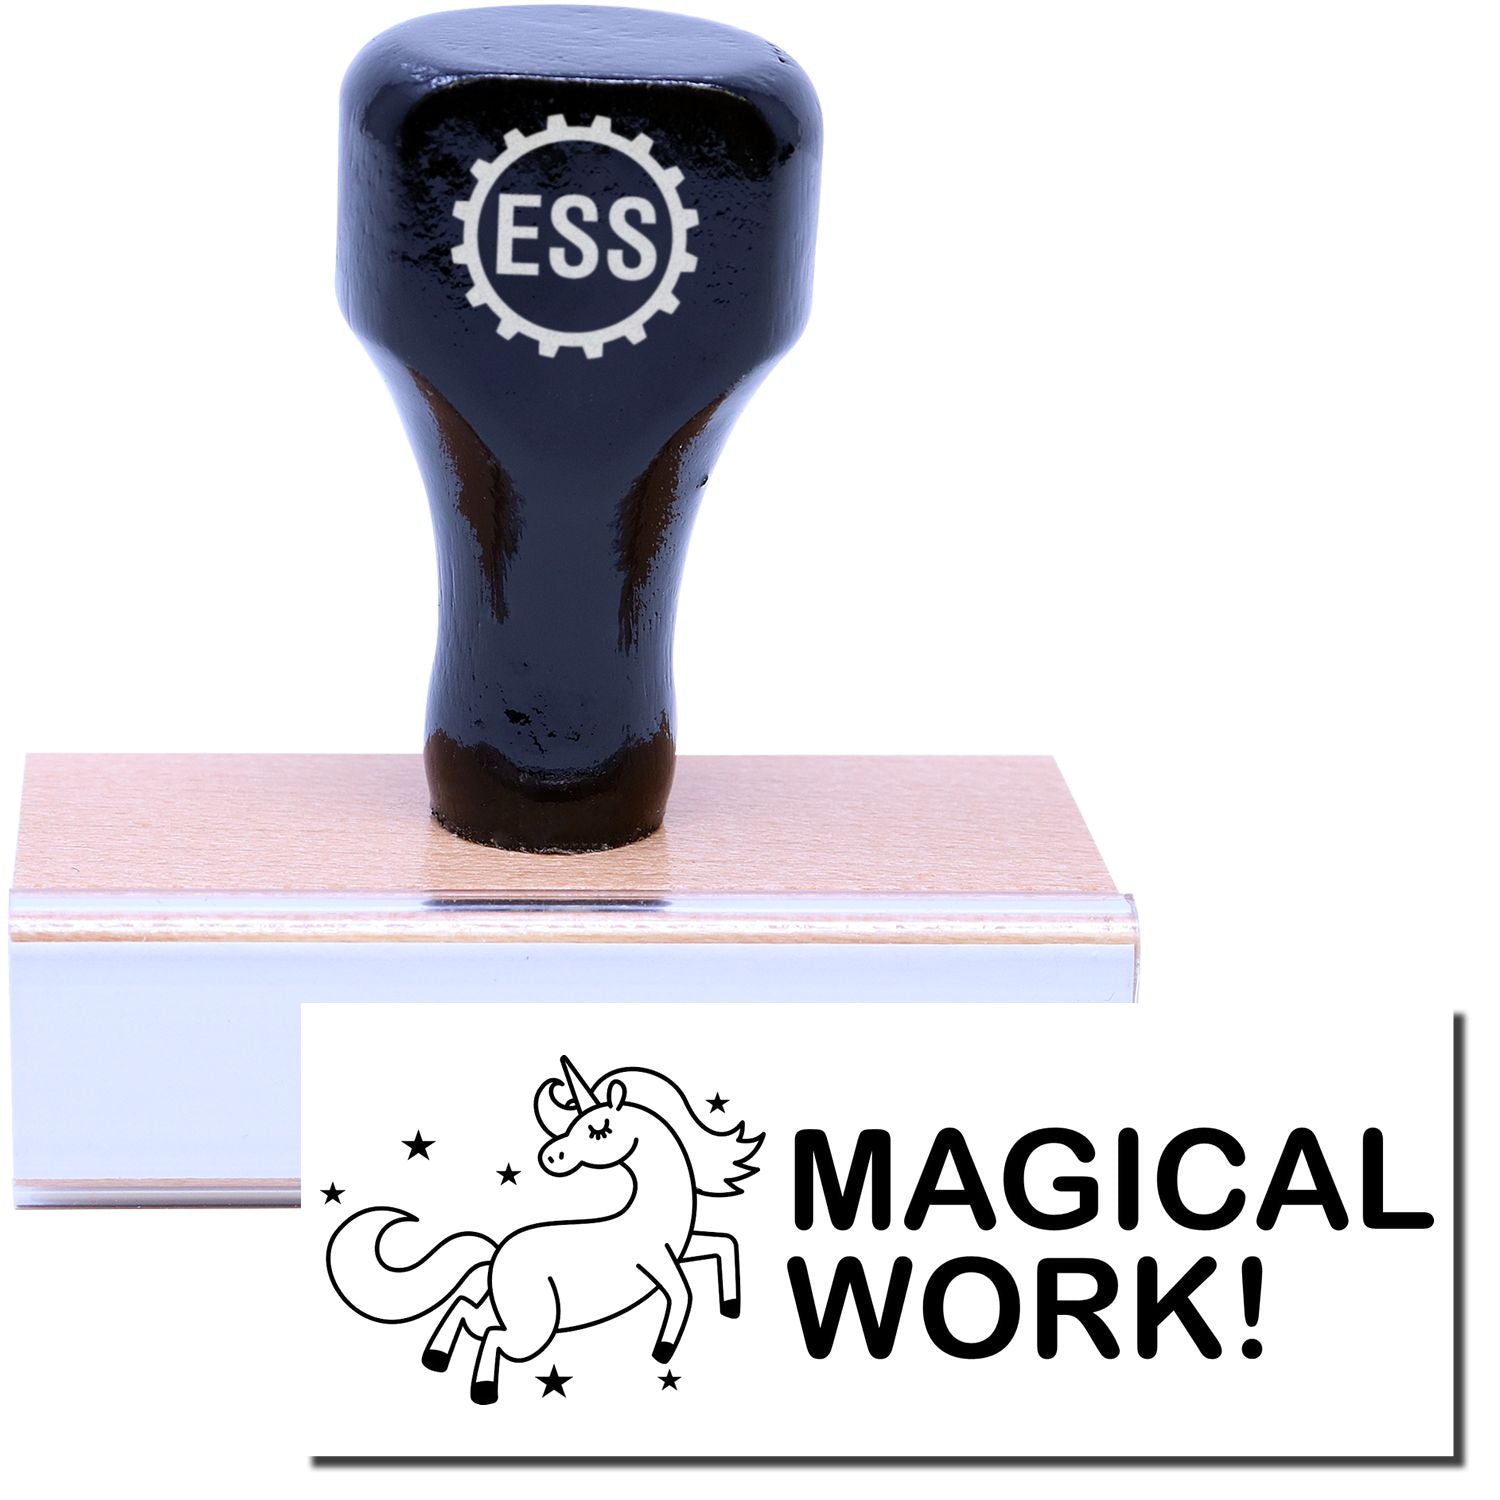 A stock office rubber stamp with a stamped image showing how the text "MAGICAL WORK!" in a large font with the image of a unicorn dancing among the stars is displayed after stamping.